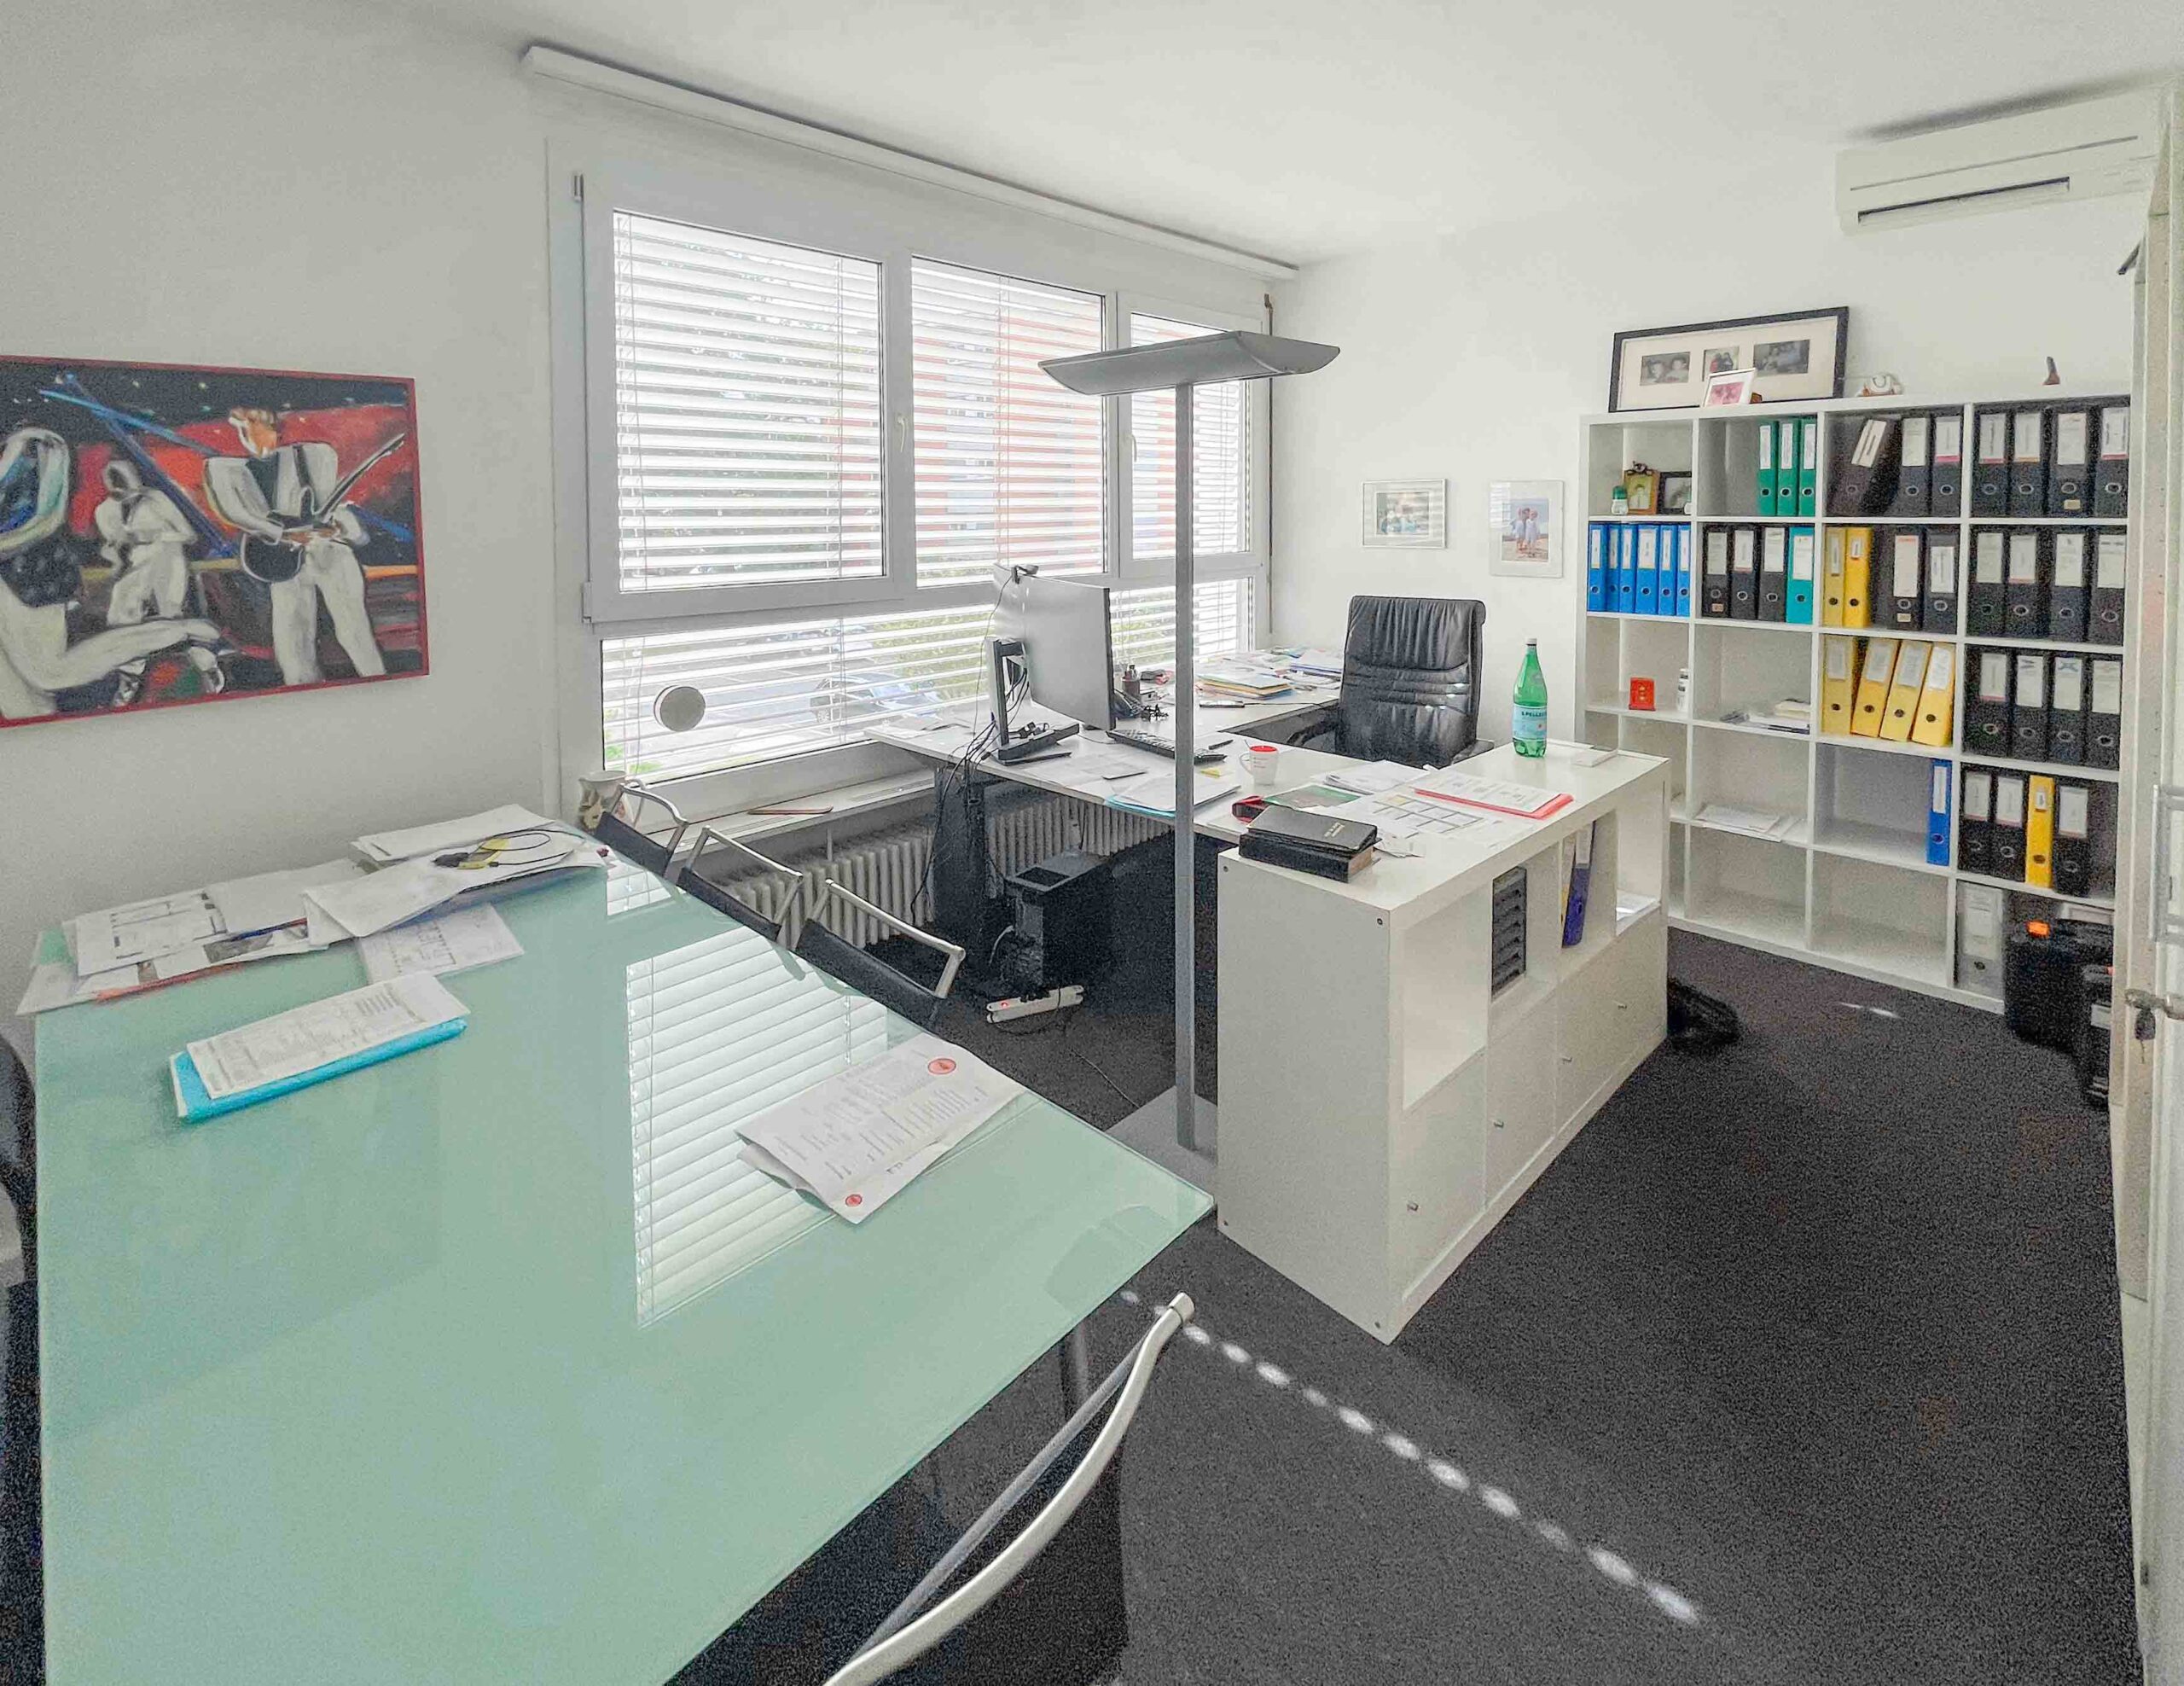 5-room office for sale in Lugano’s Besso district